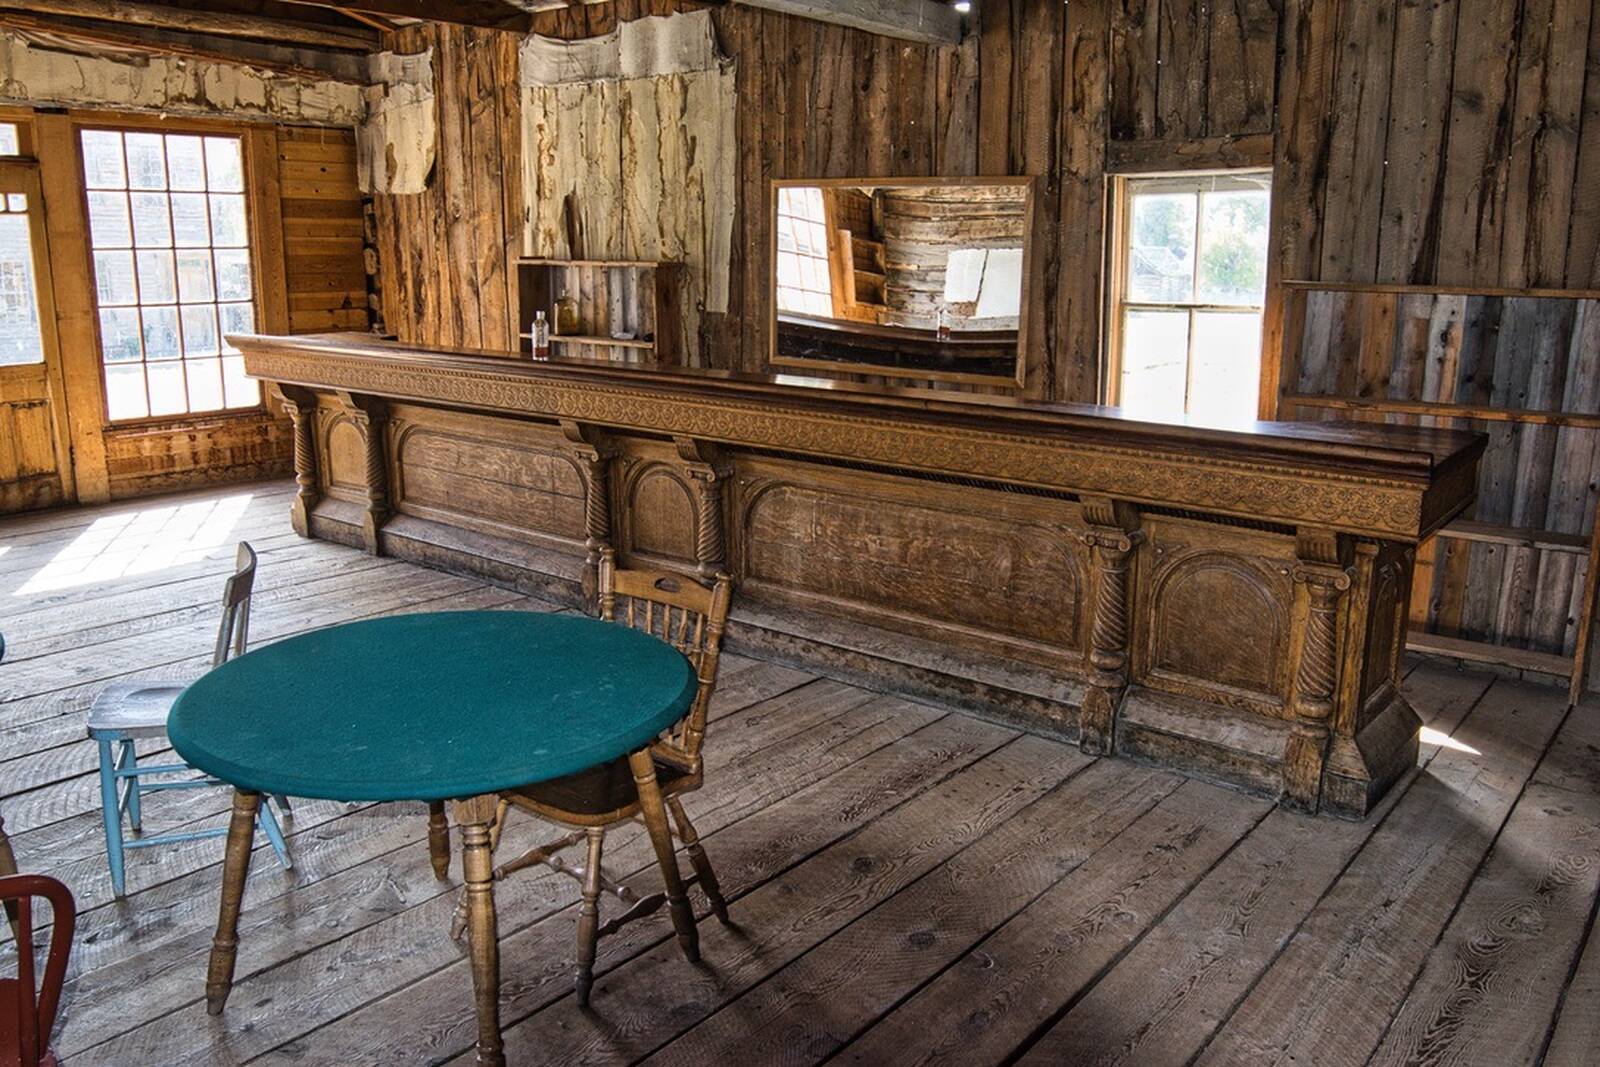 Image of Bannack, Montana Ghost Town by Steve West